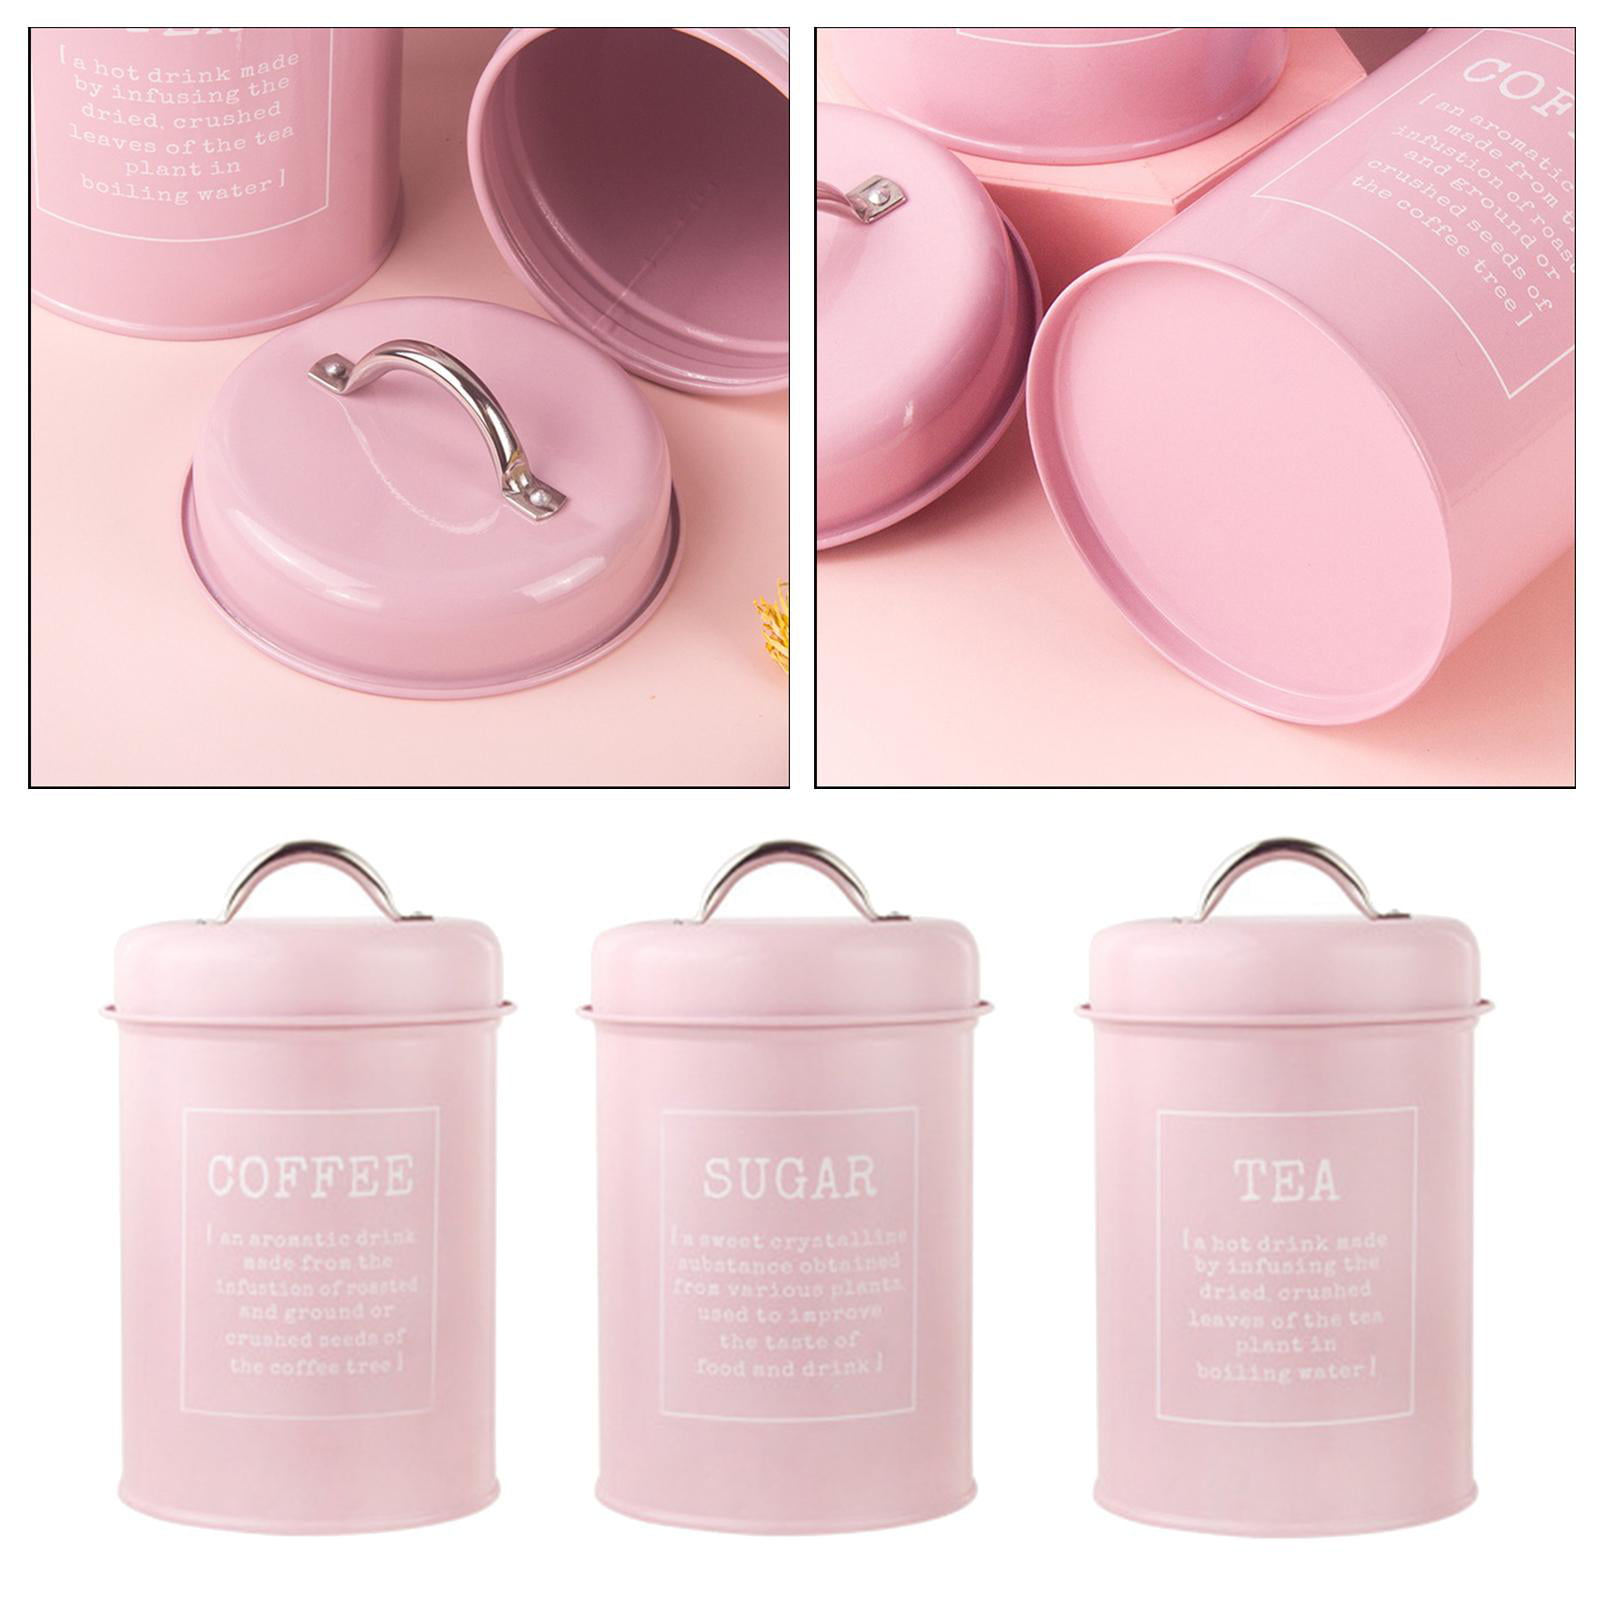 Store your tea, coffee and sugar in these attractive containers